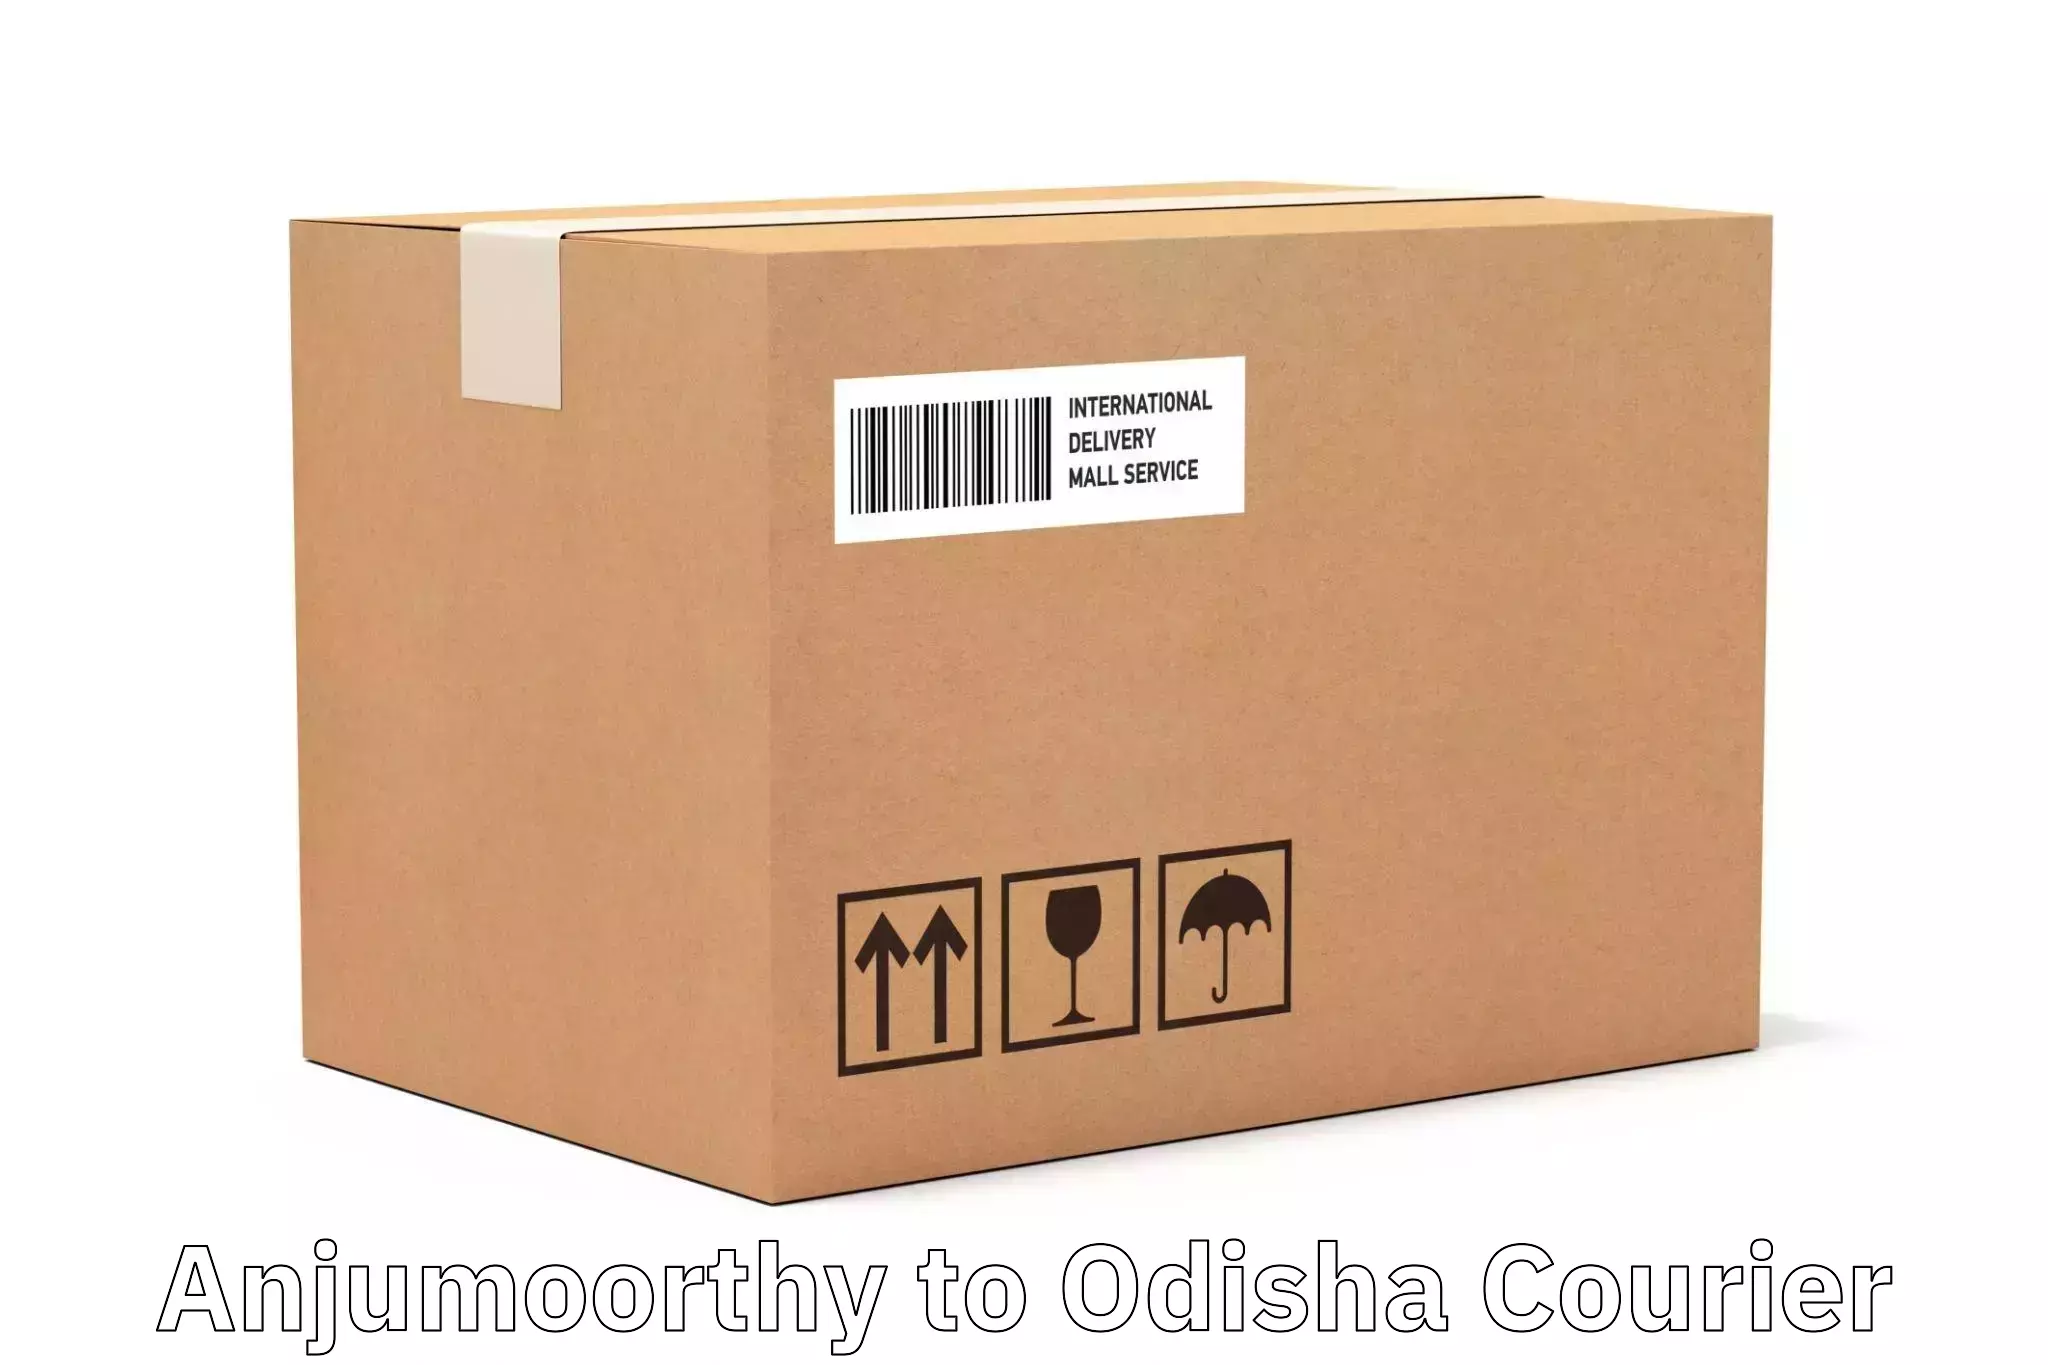 Parcel delivery automation Anjumoorthy to Odisha